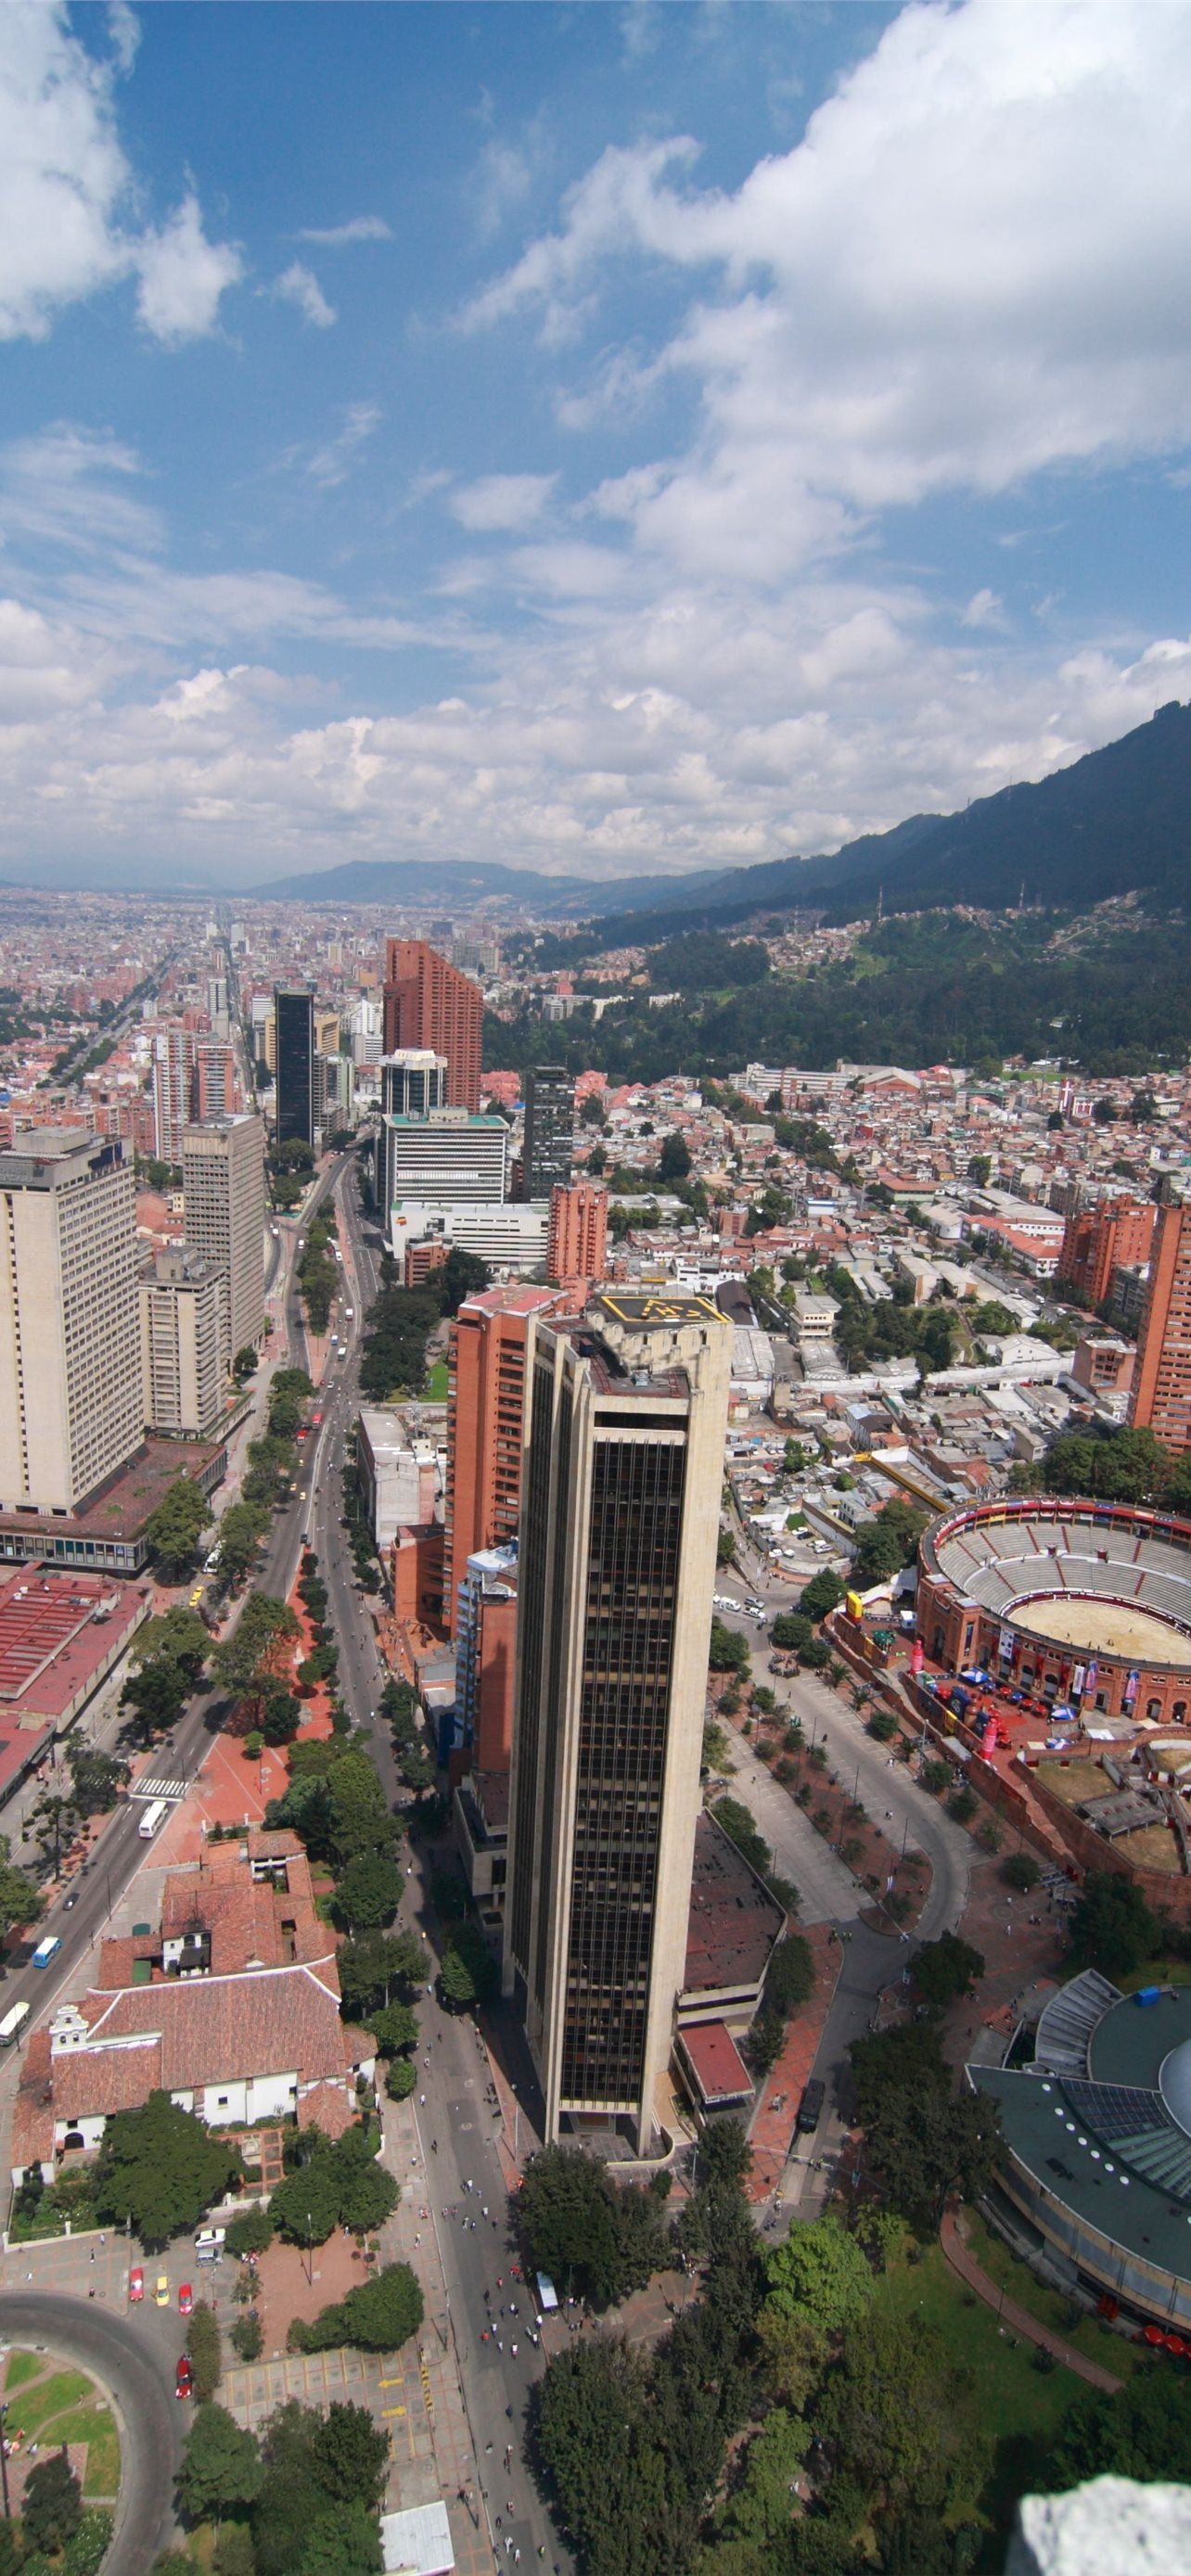 Colombia: Bogota, Colombia's beating heart, City skyline. 1290x2780 HD Wallpaper.